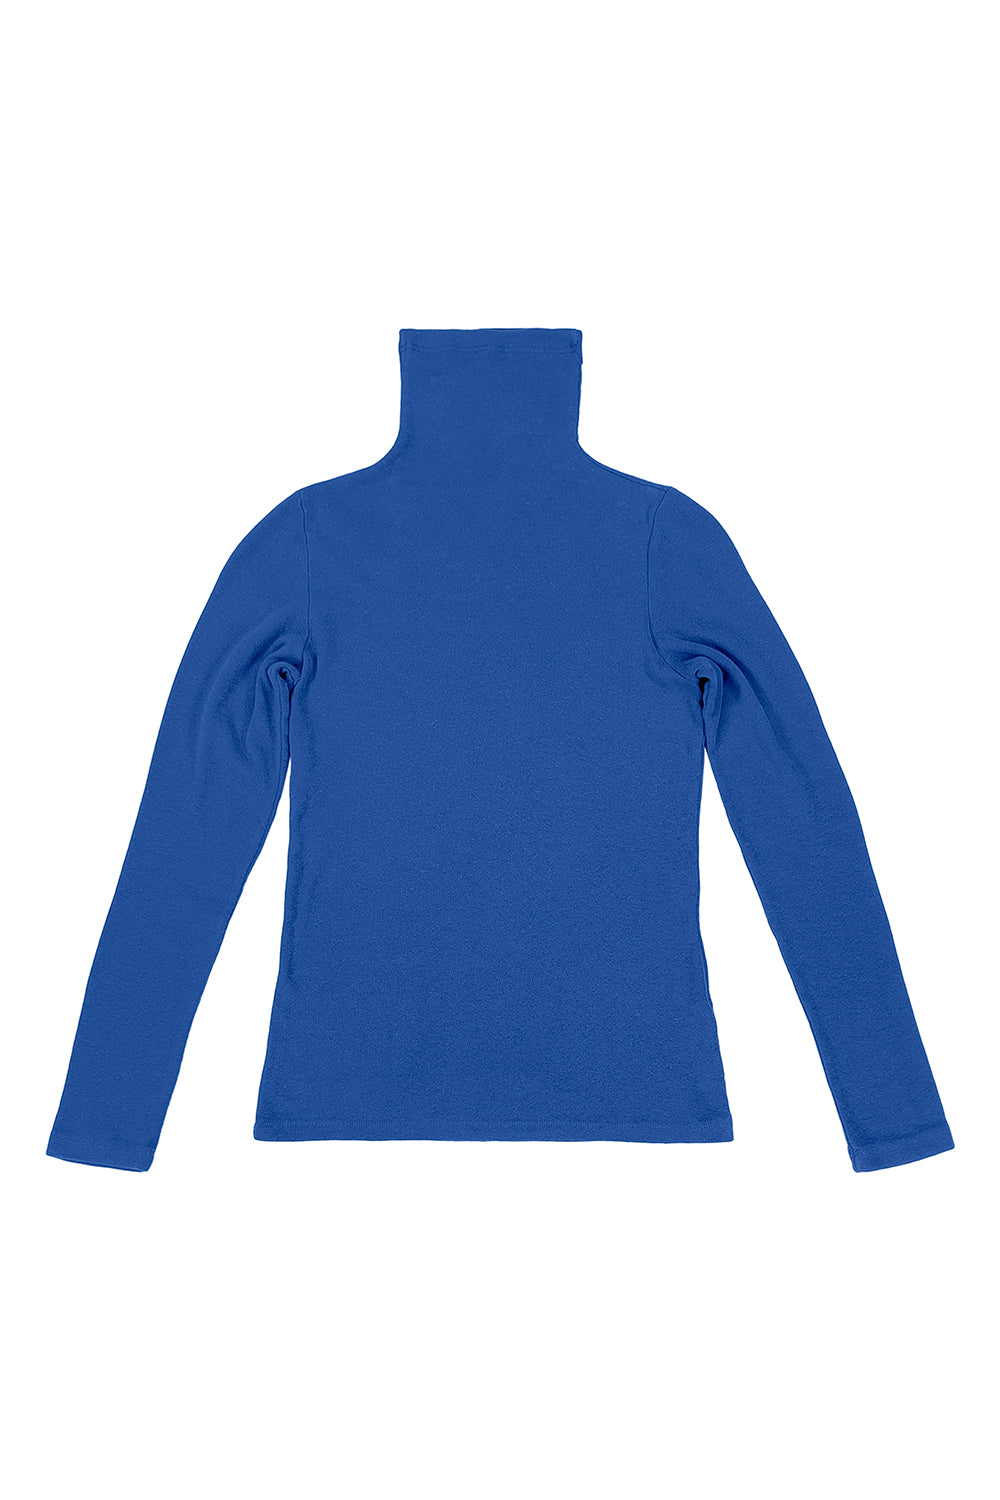 Whidbey Turtleneck | Jungmaven Hemp Clothing & Accessories / Color: Galaxy Blue